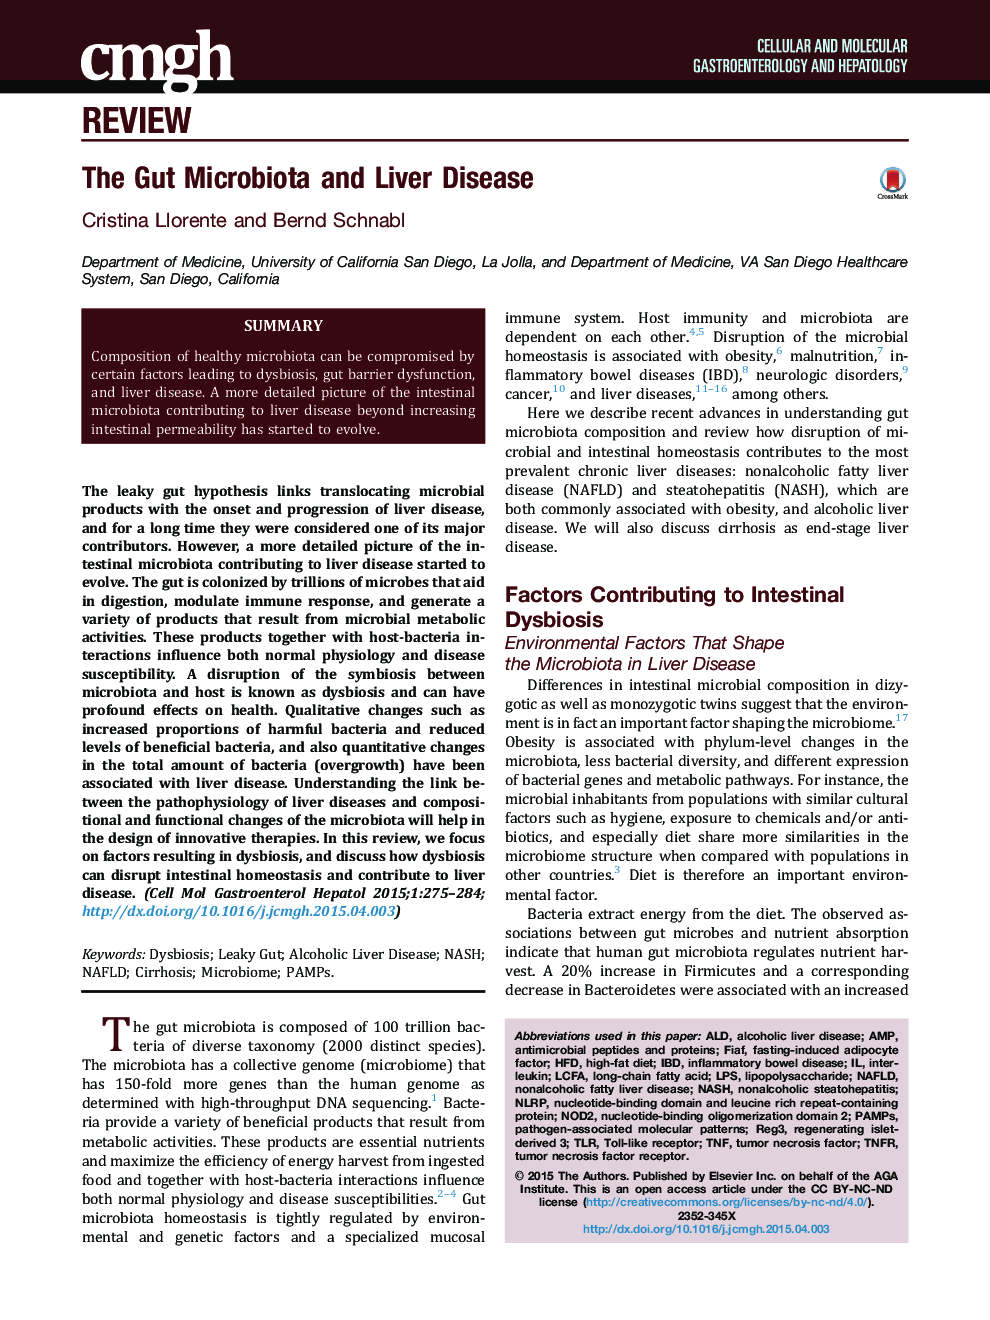 The Gut Microbiota and Liver Disease 